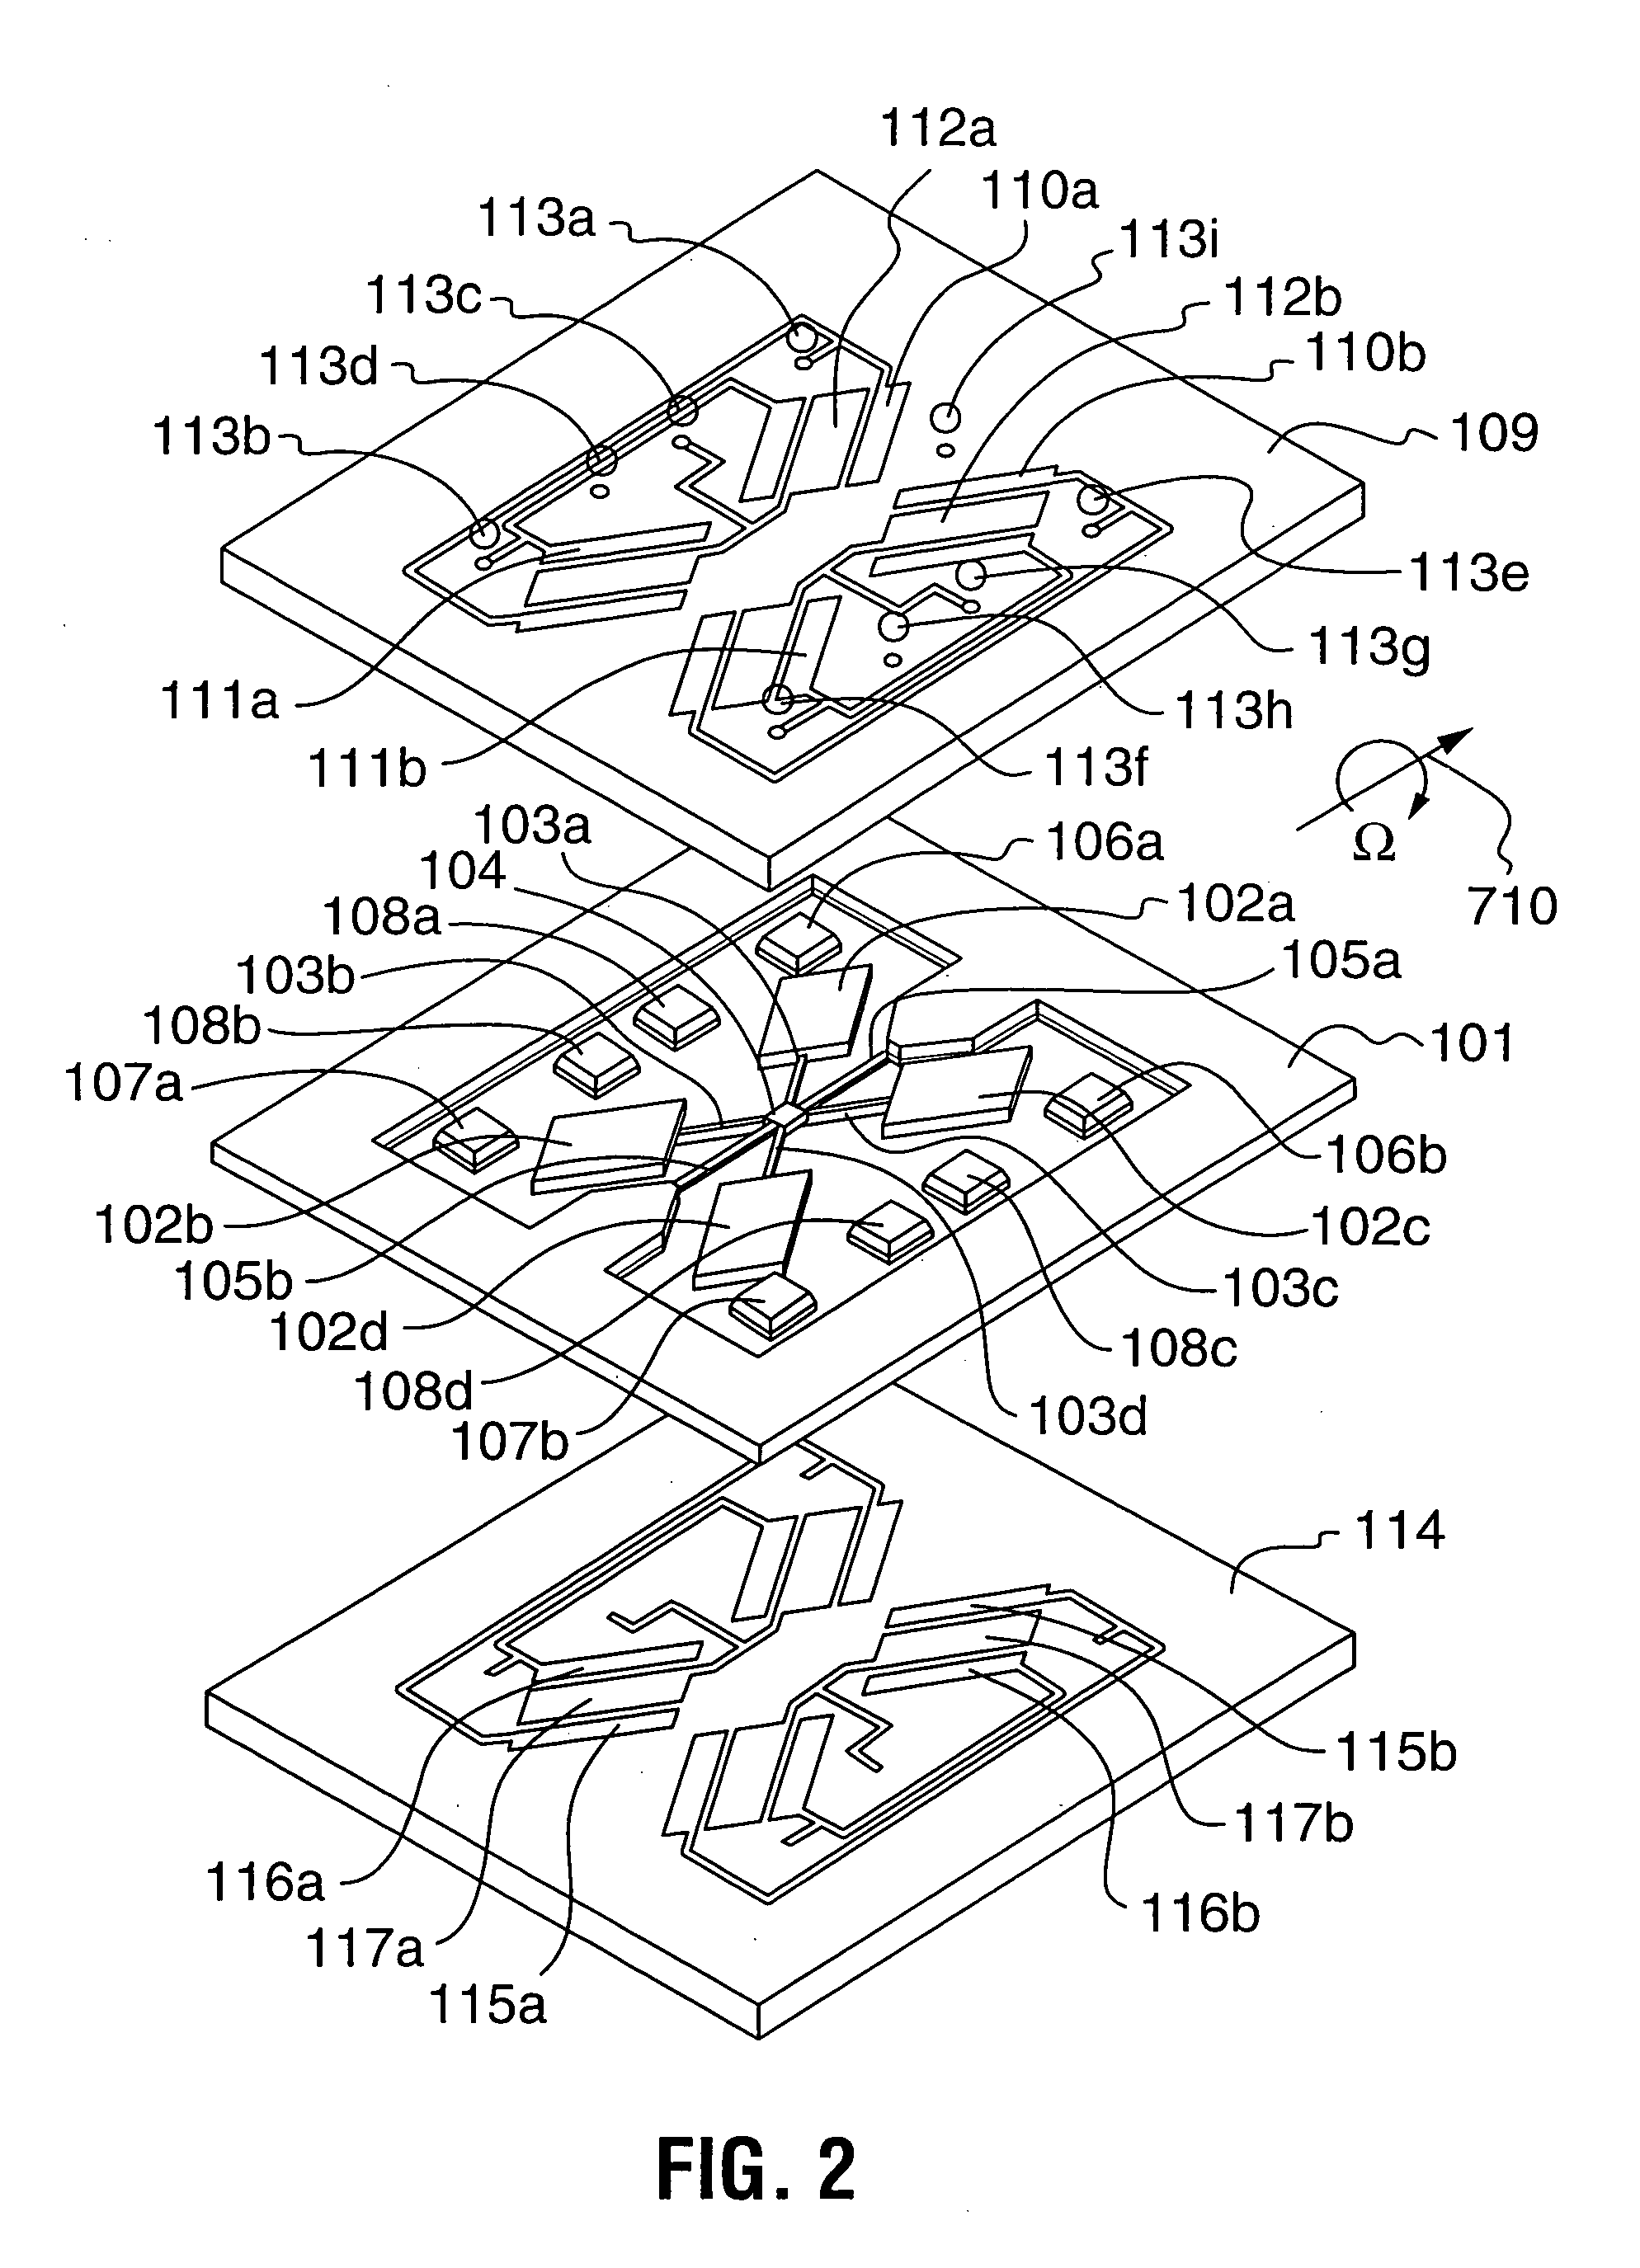 Wafer level packaging technique for microdevices